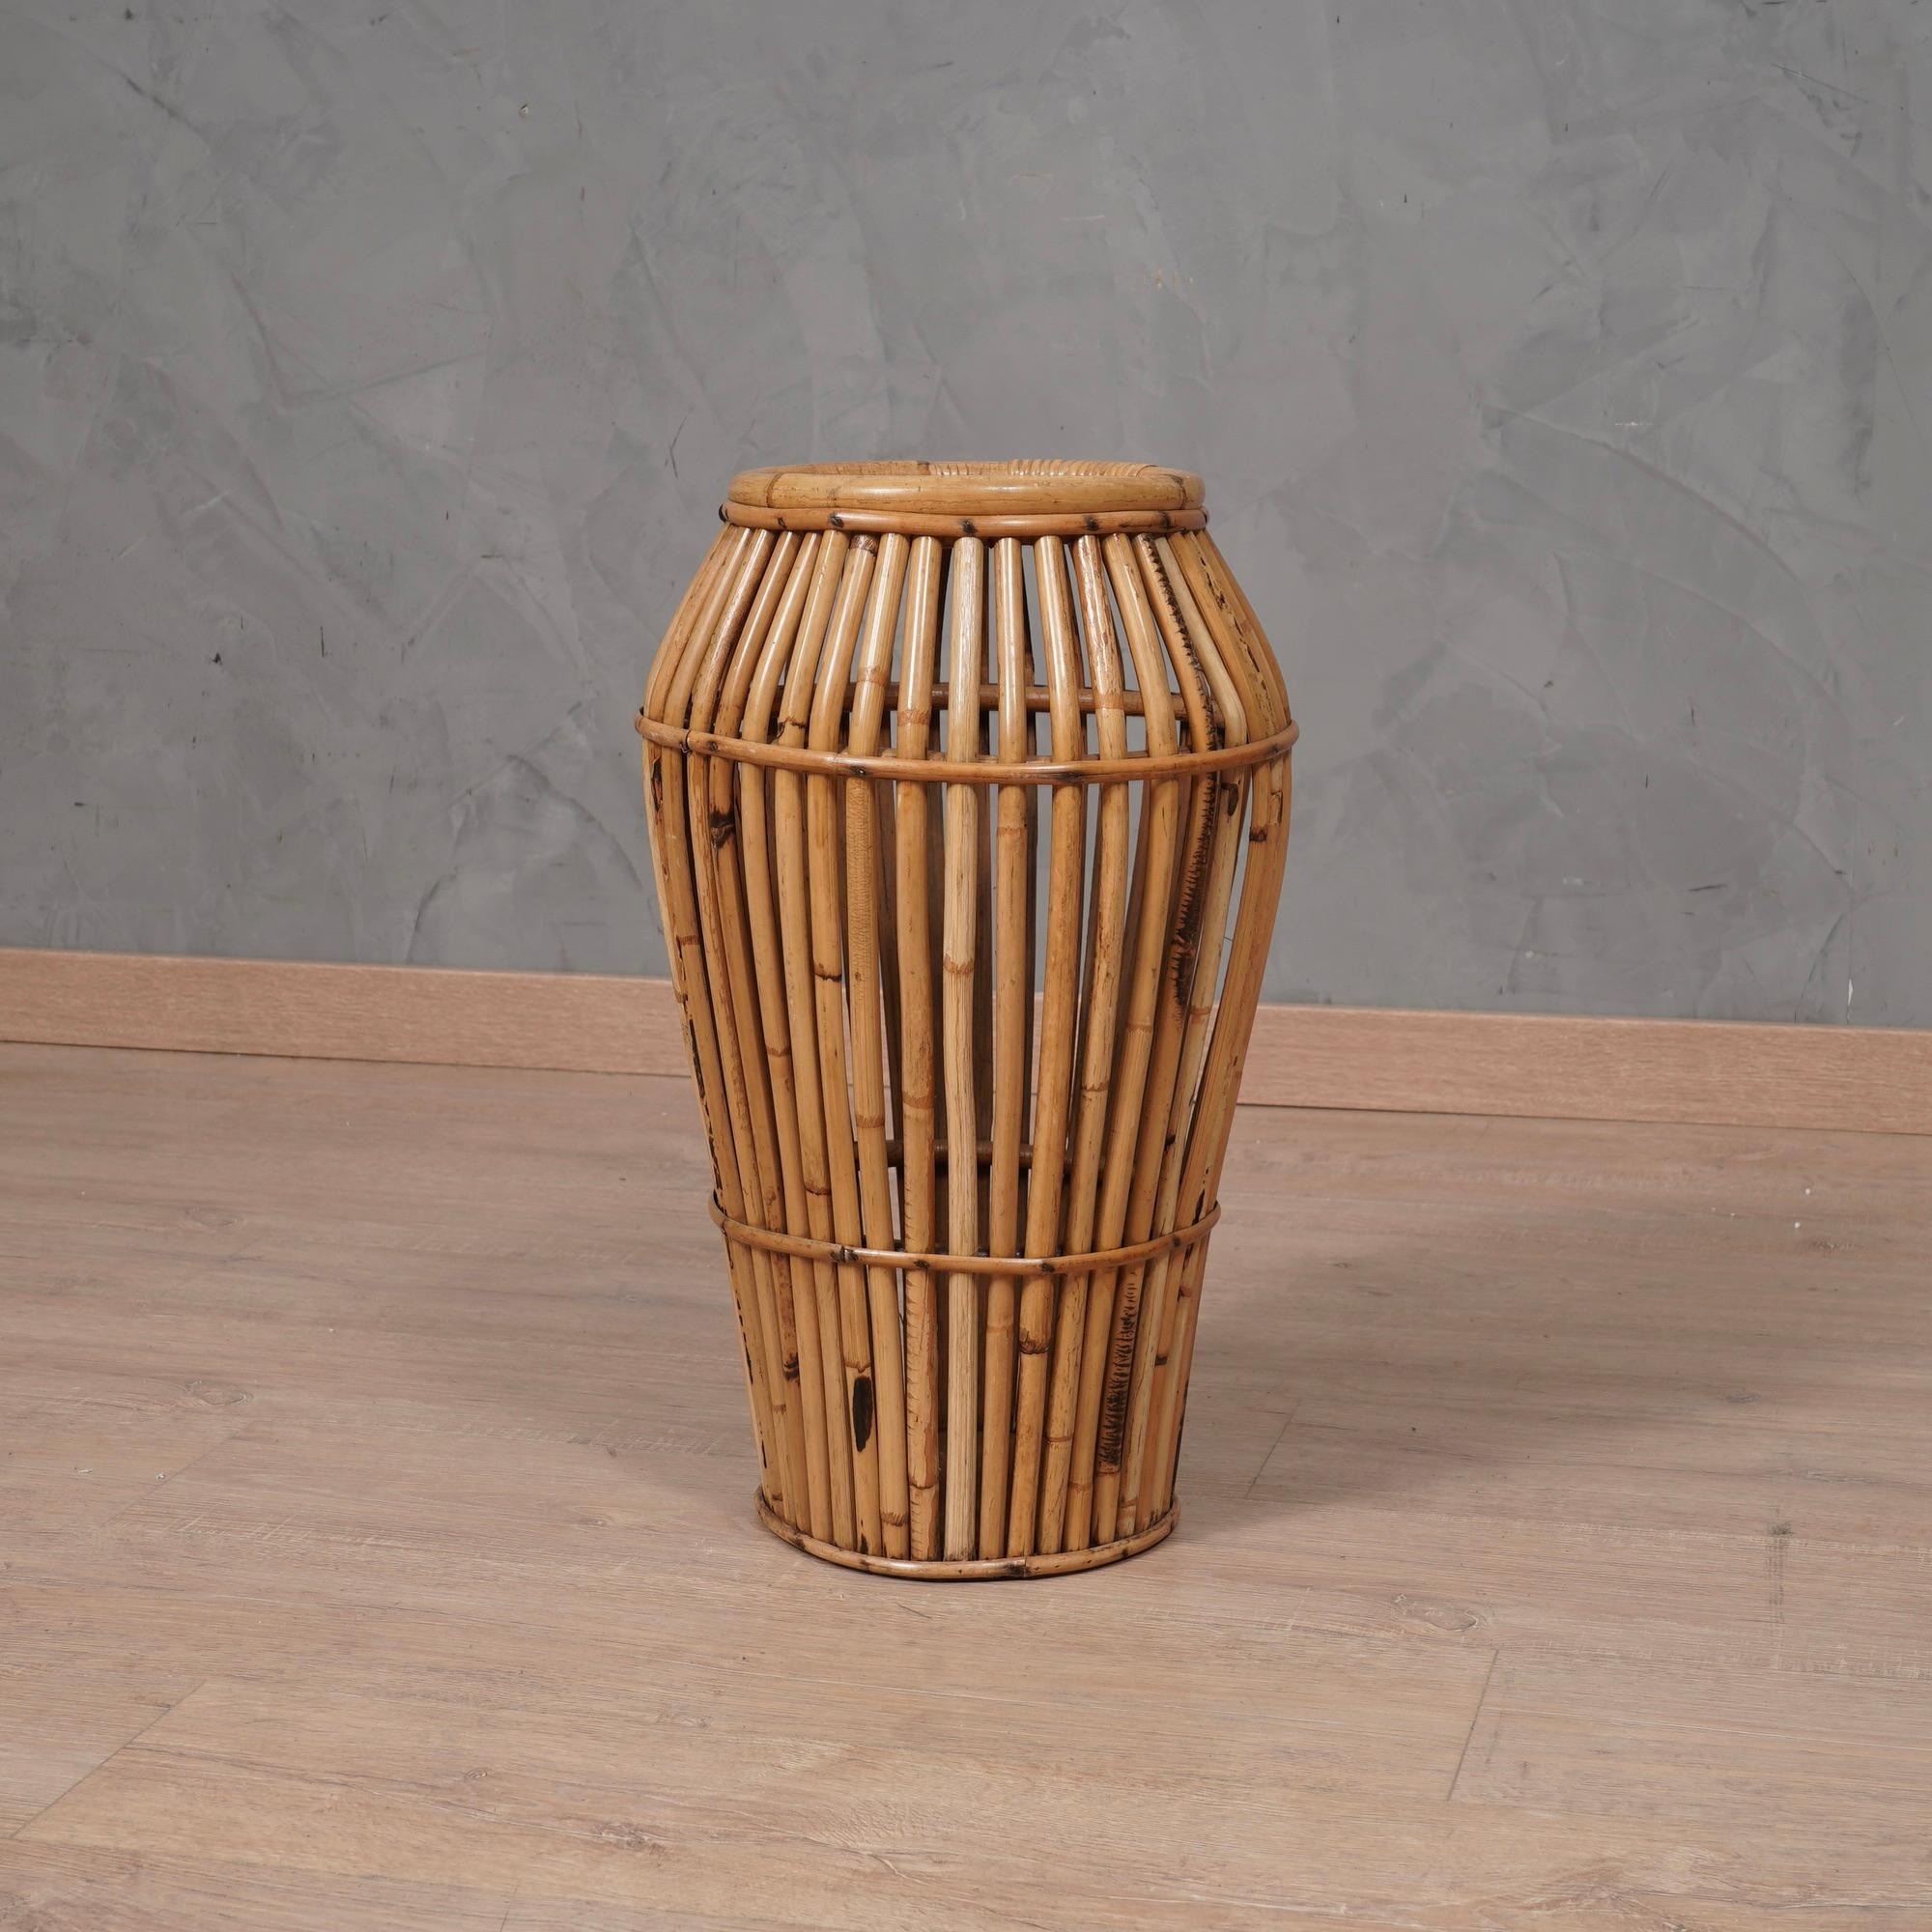 Rattan umbrella stand designed by the Dutch designer Olaf Von Bohr for the Bonacina company in the 1960s. Elegant and versatile, the umbrella stand has a very light and linear design. A union between architect and company that in the 60s and 70s led